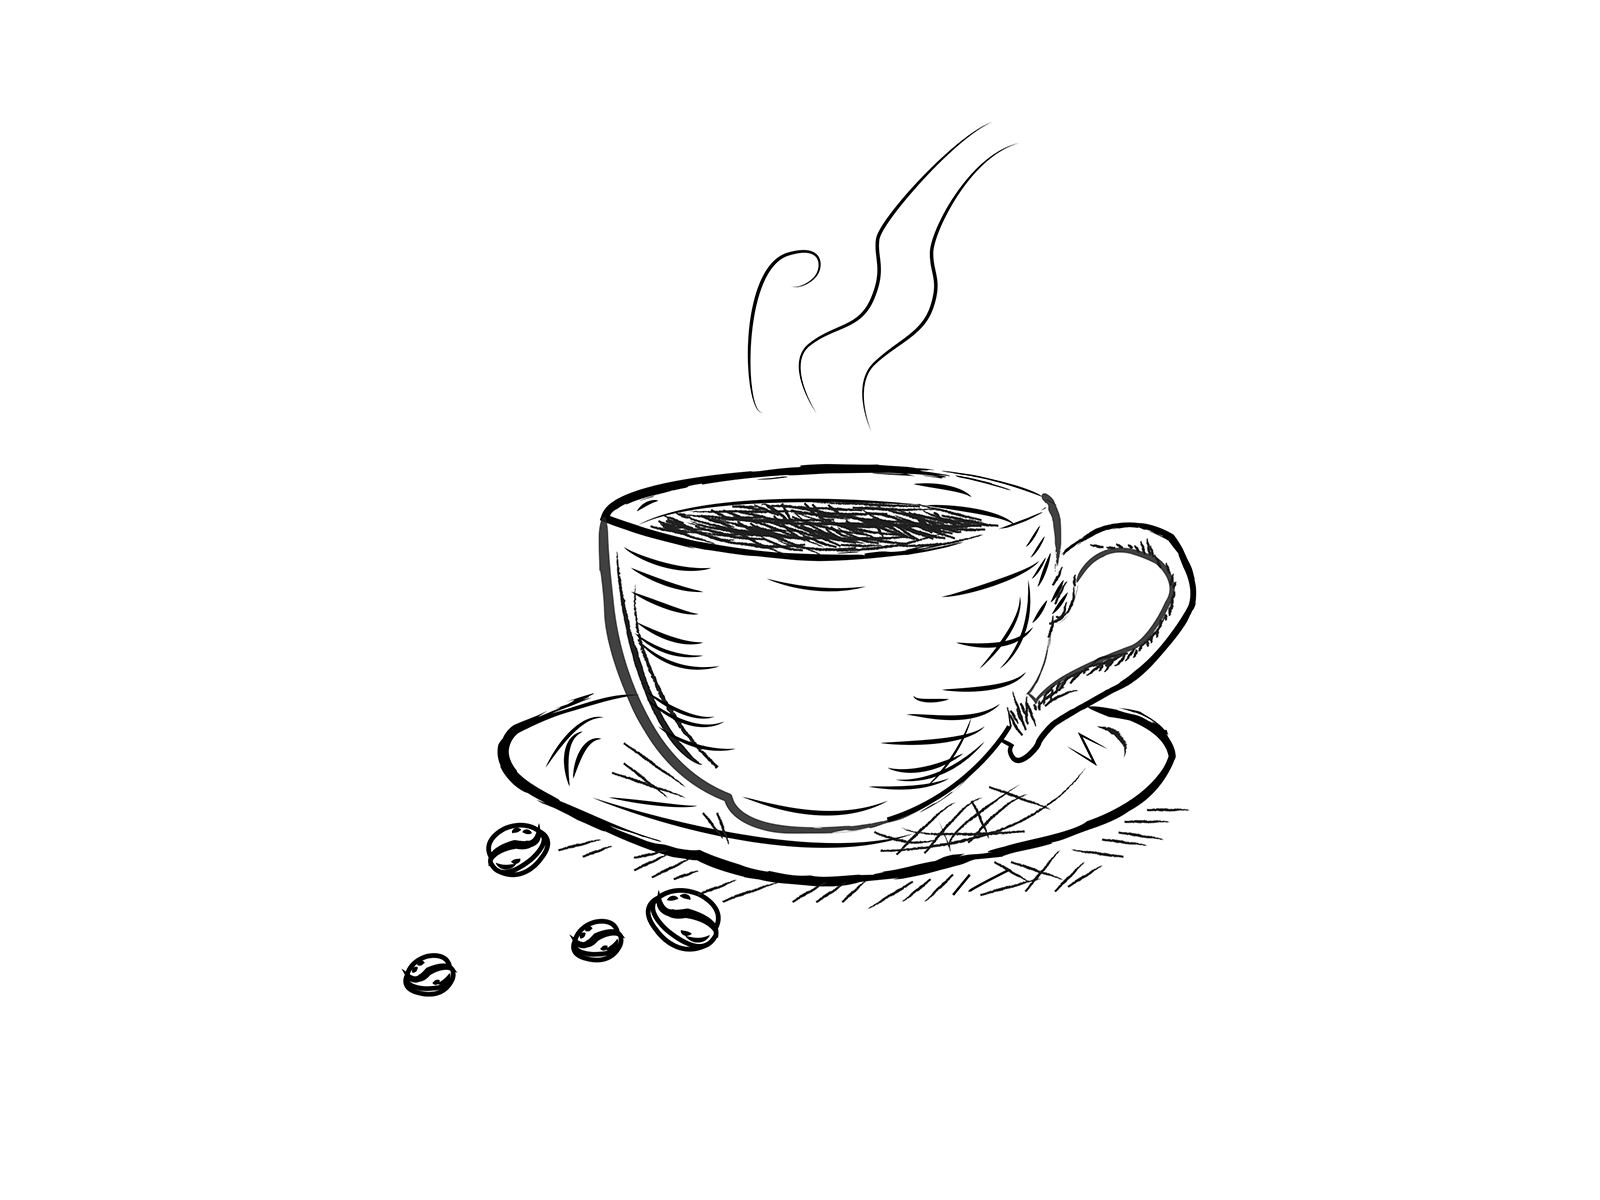  A coffee cup - line art style by Milos Lacko on Dribbble